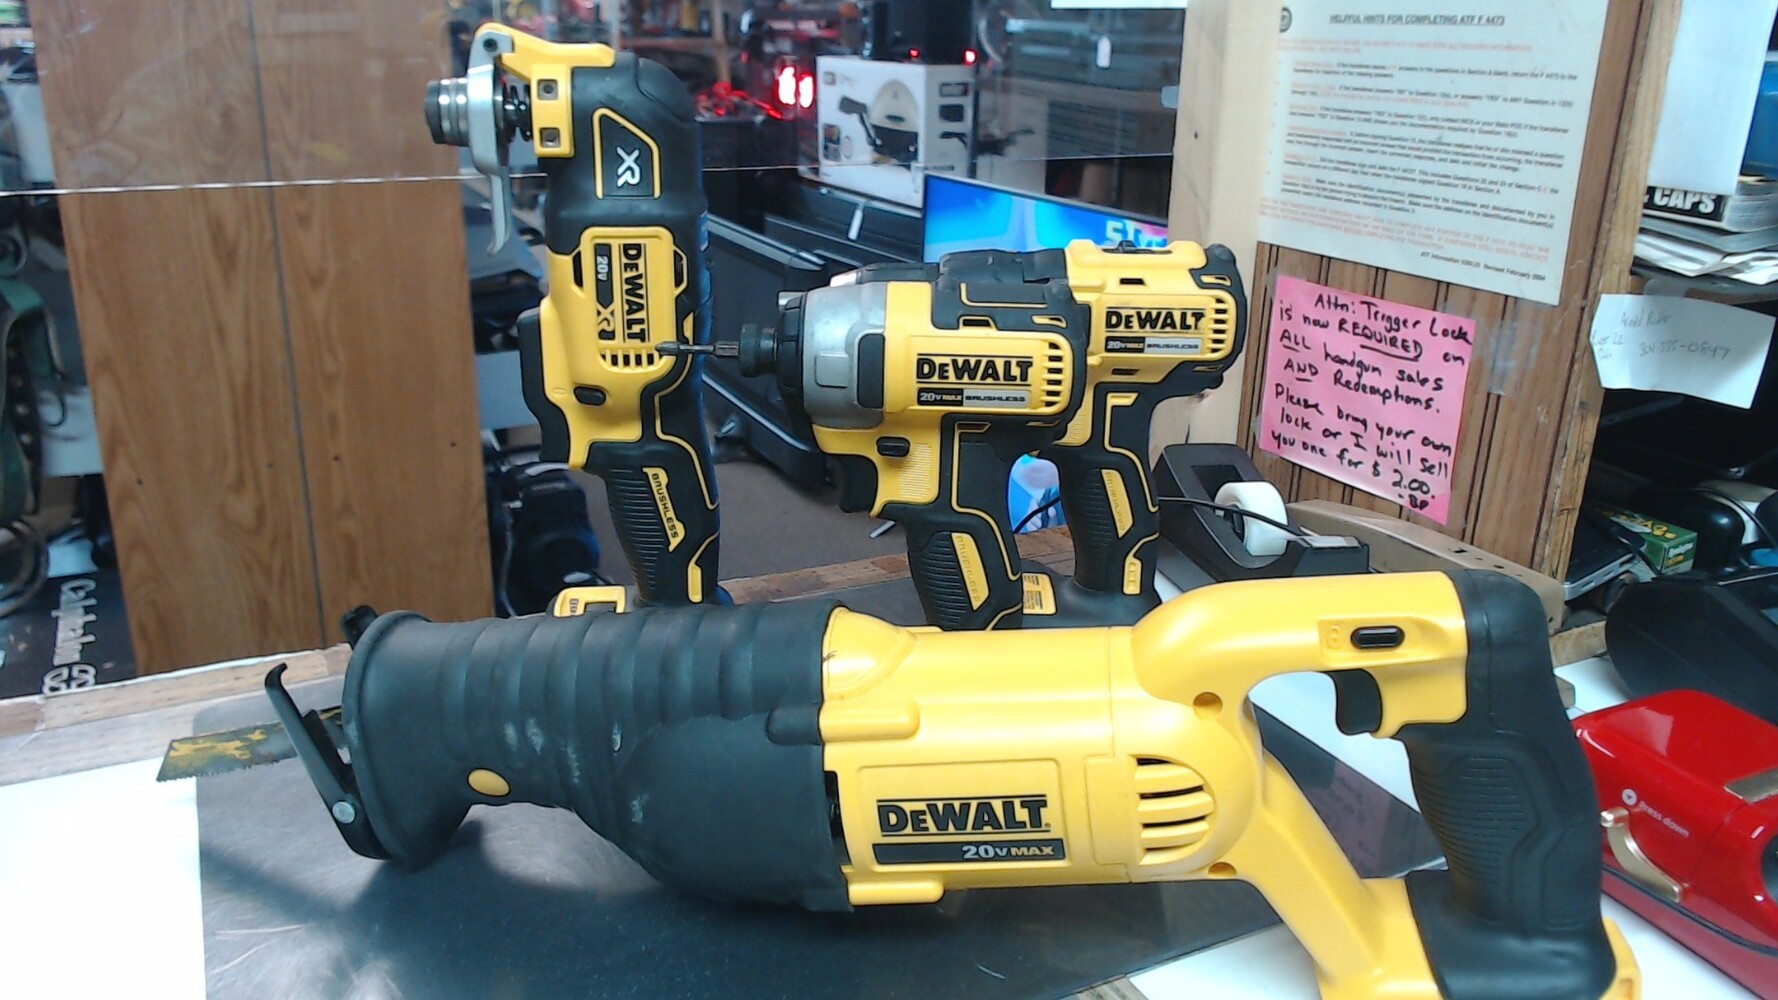 Dewalt 20v Drill, Driver, Oscillating & Sawzall w/ 1 battery and charger